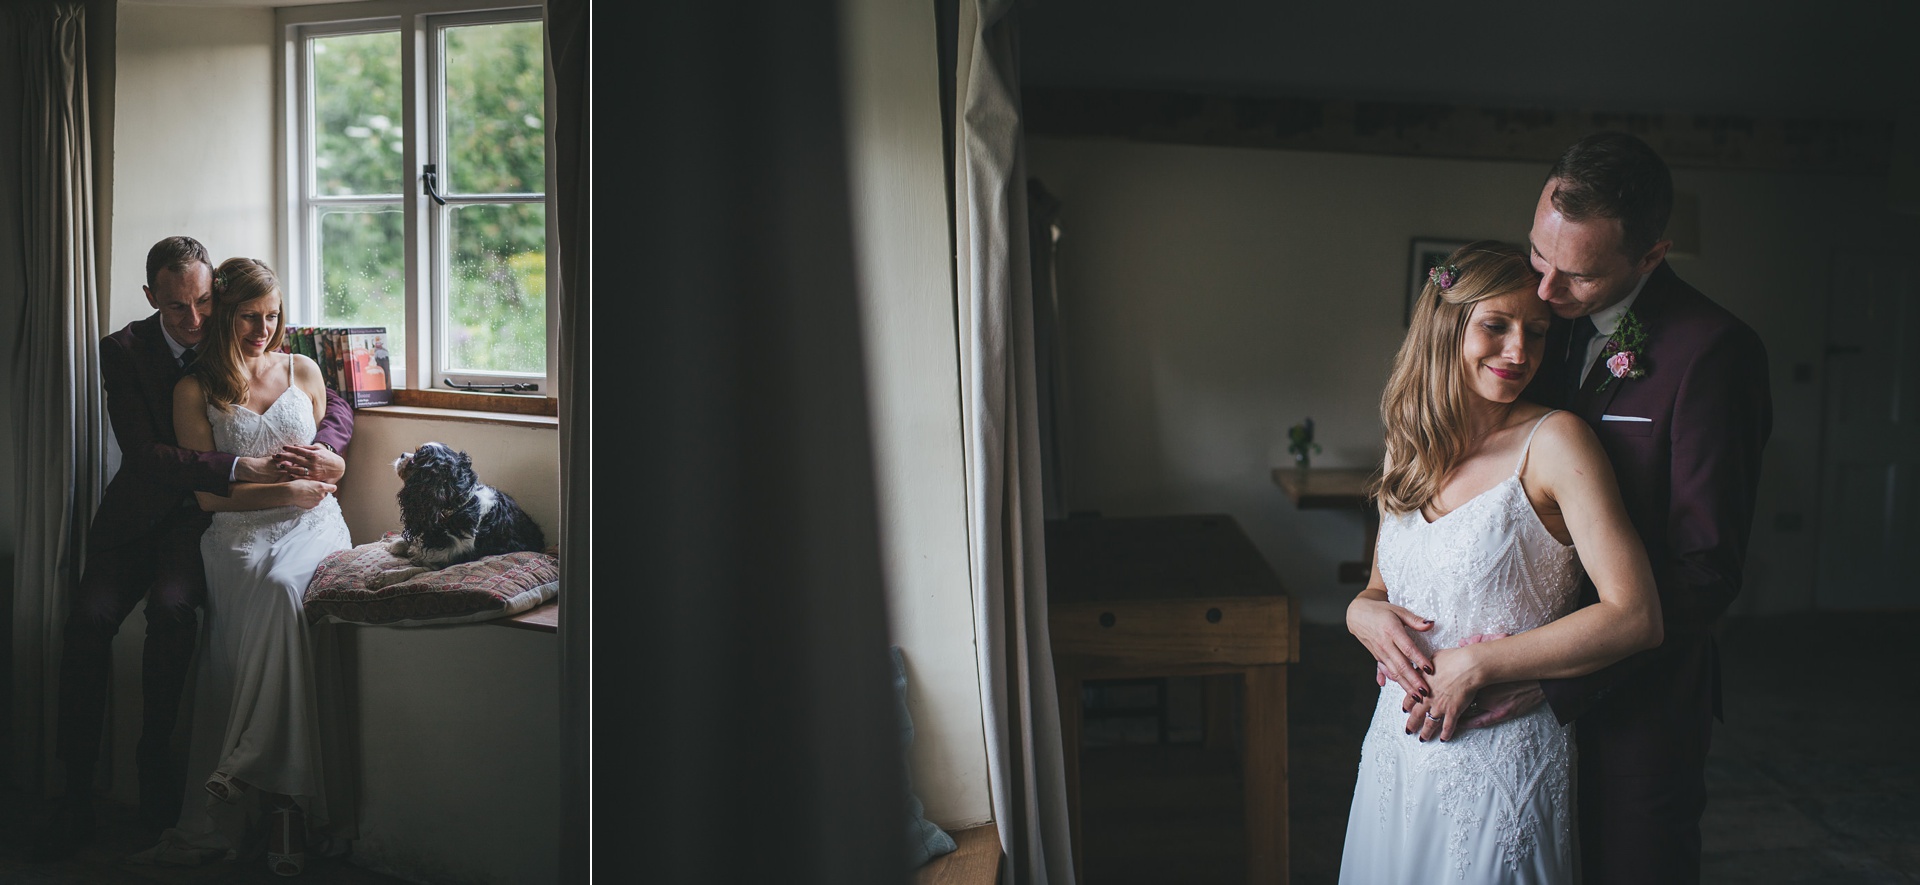 Indoor portraits of a bride and groom and their dog, with rain outside